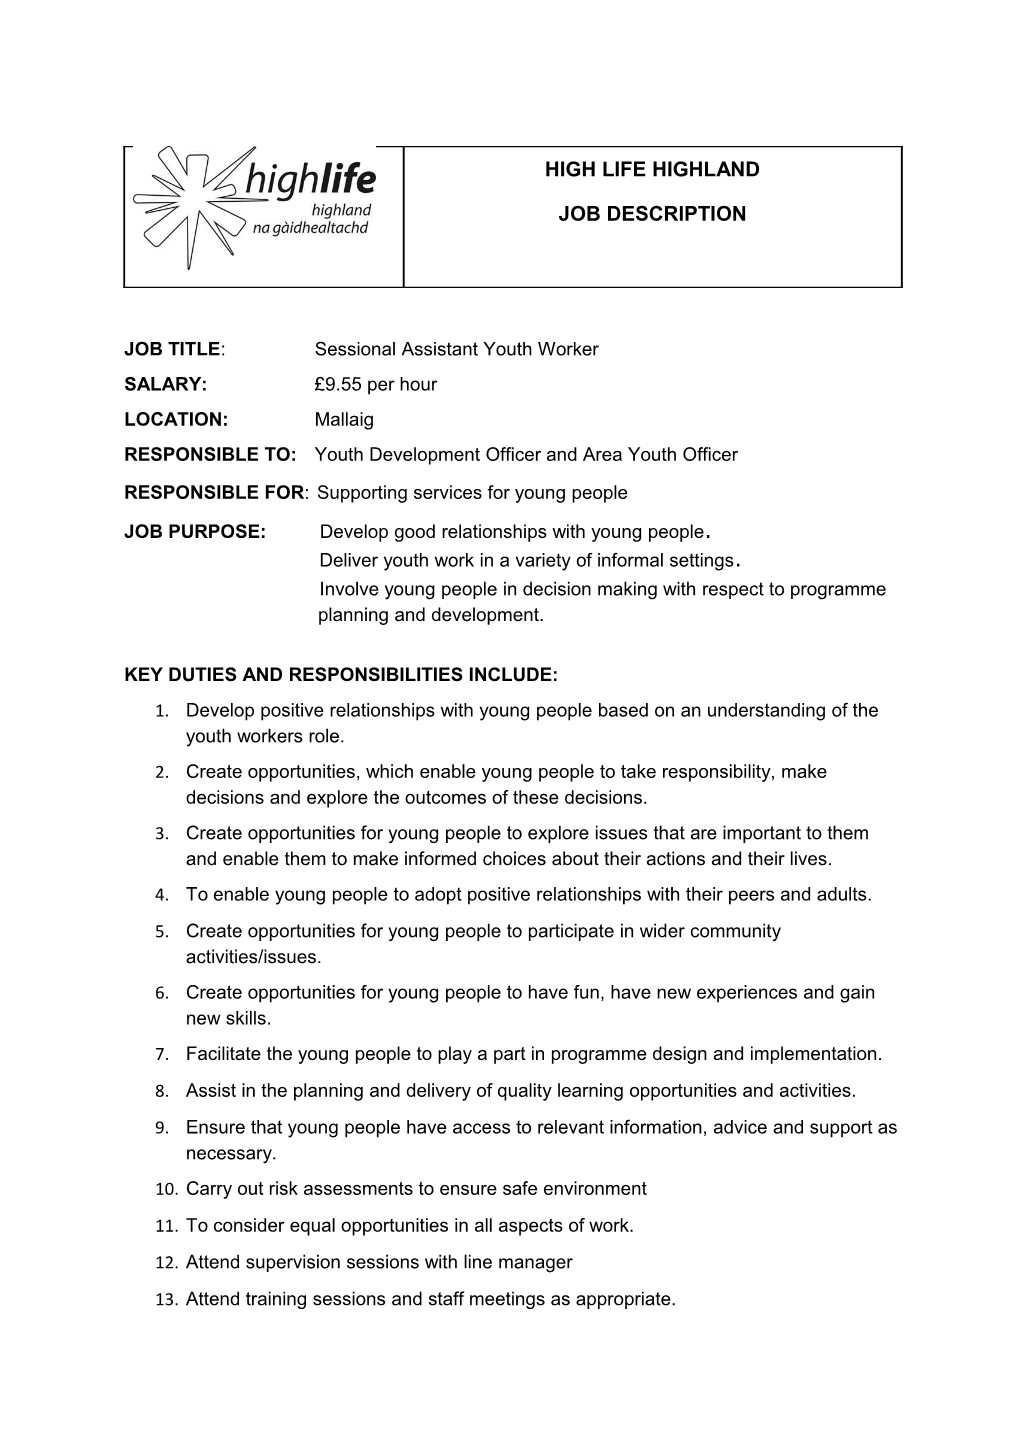 JOB TITLE:Sessional Assistant Youth Worker